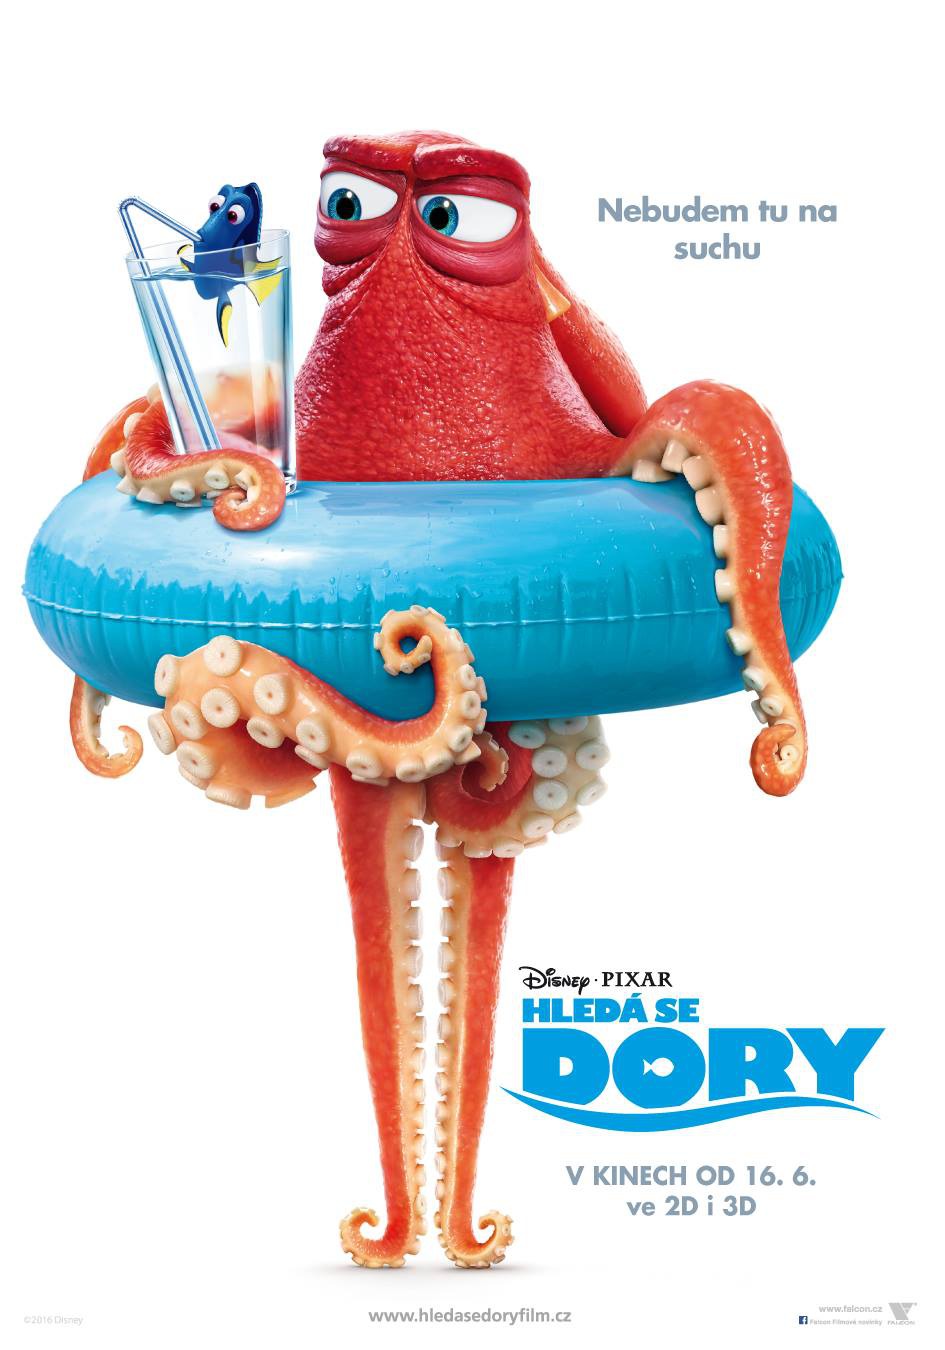 Extra Large Movie Poster Image for Finding Dory (#18 of 23)